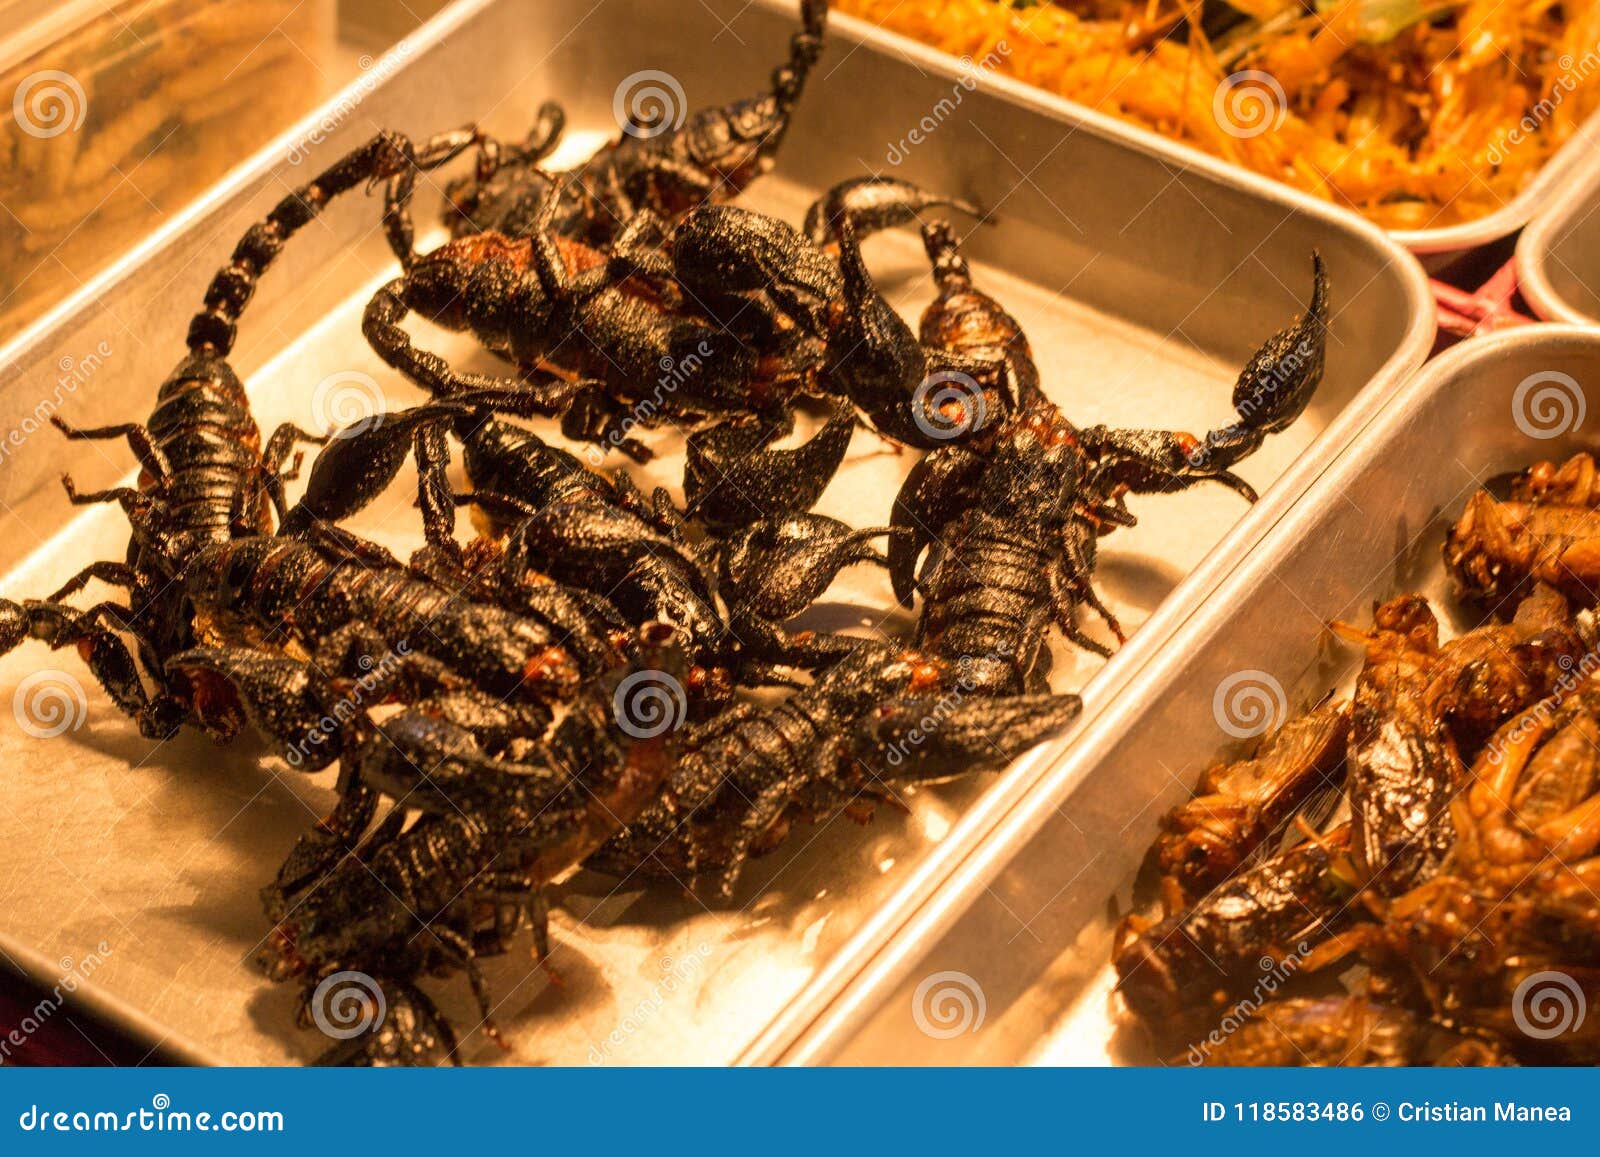 https://thumbs.dreamstime.com/z/corpions-snack-insects-street-market-bangkok-thailand-photo-taken-november-fried-scorpions-snack-insects-118583486.jpg